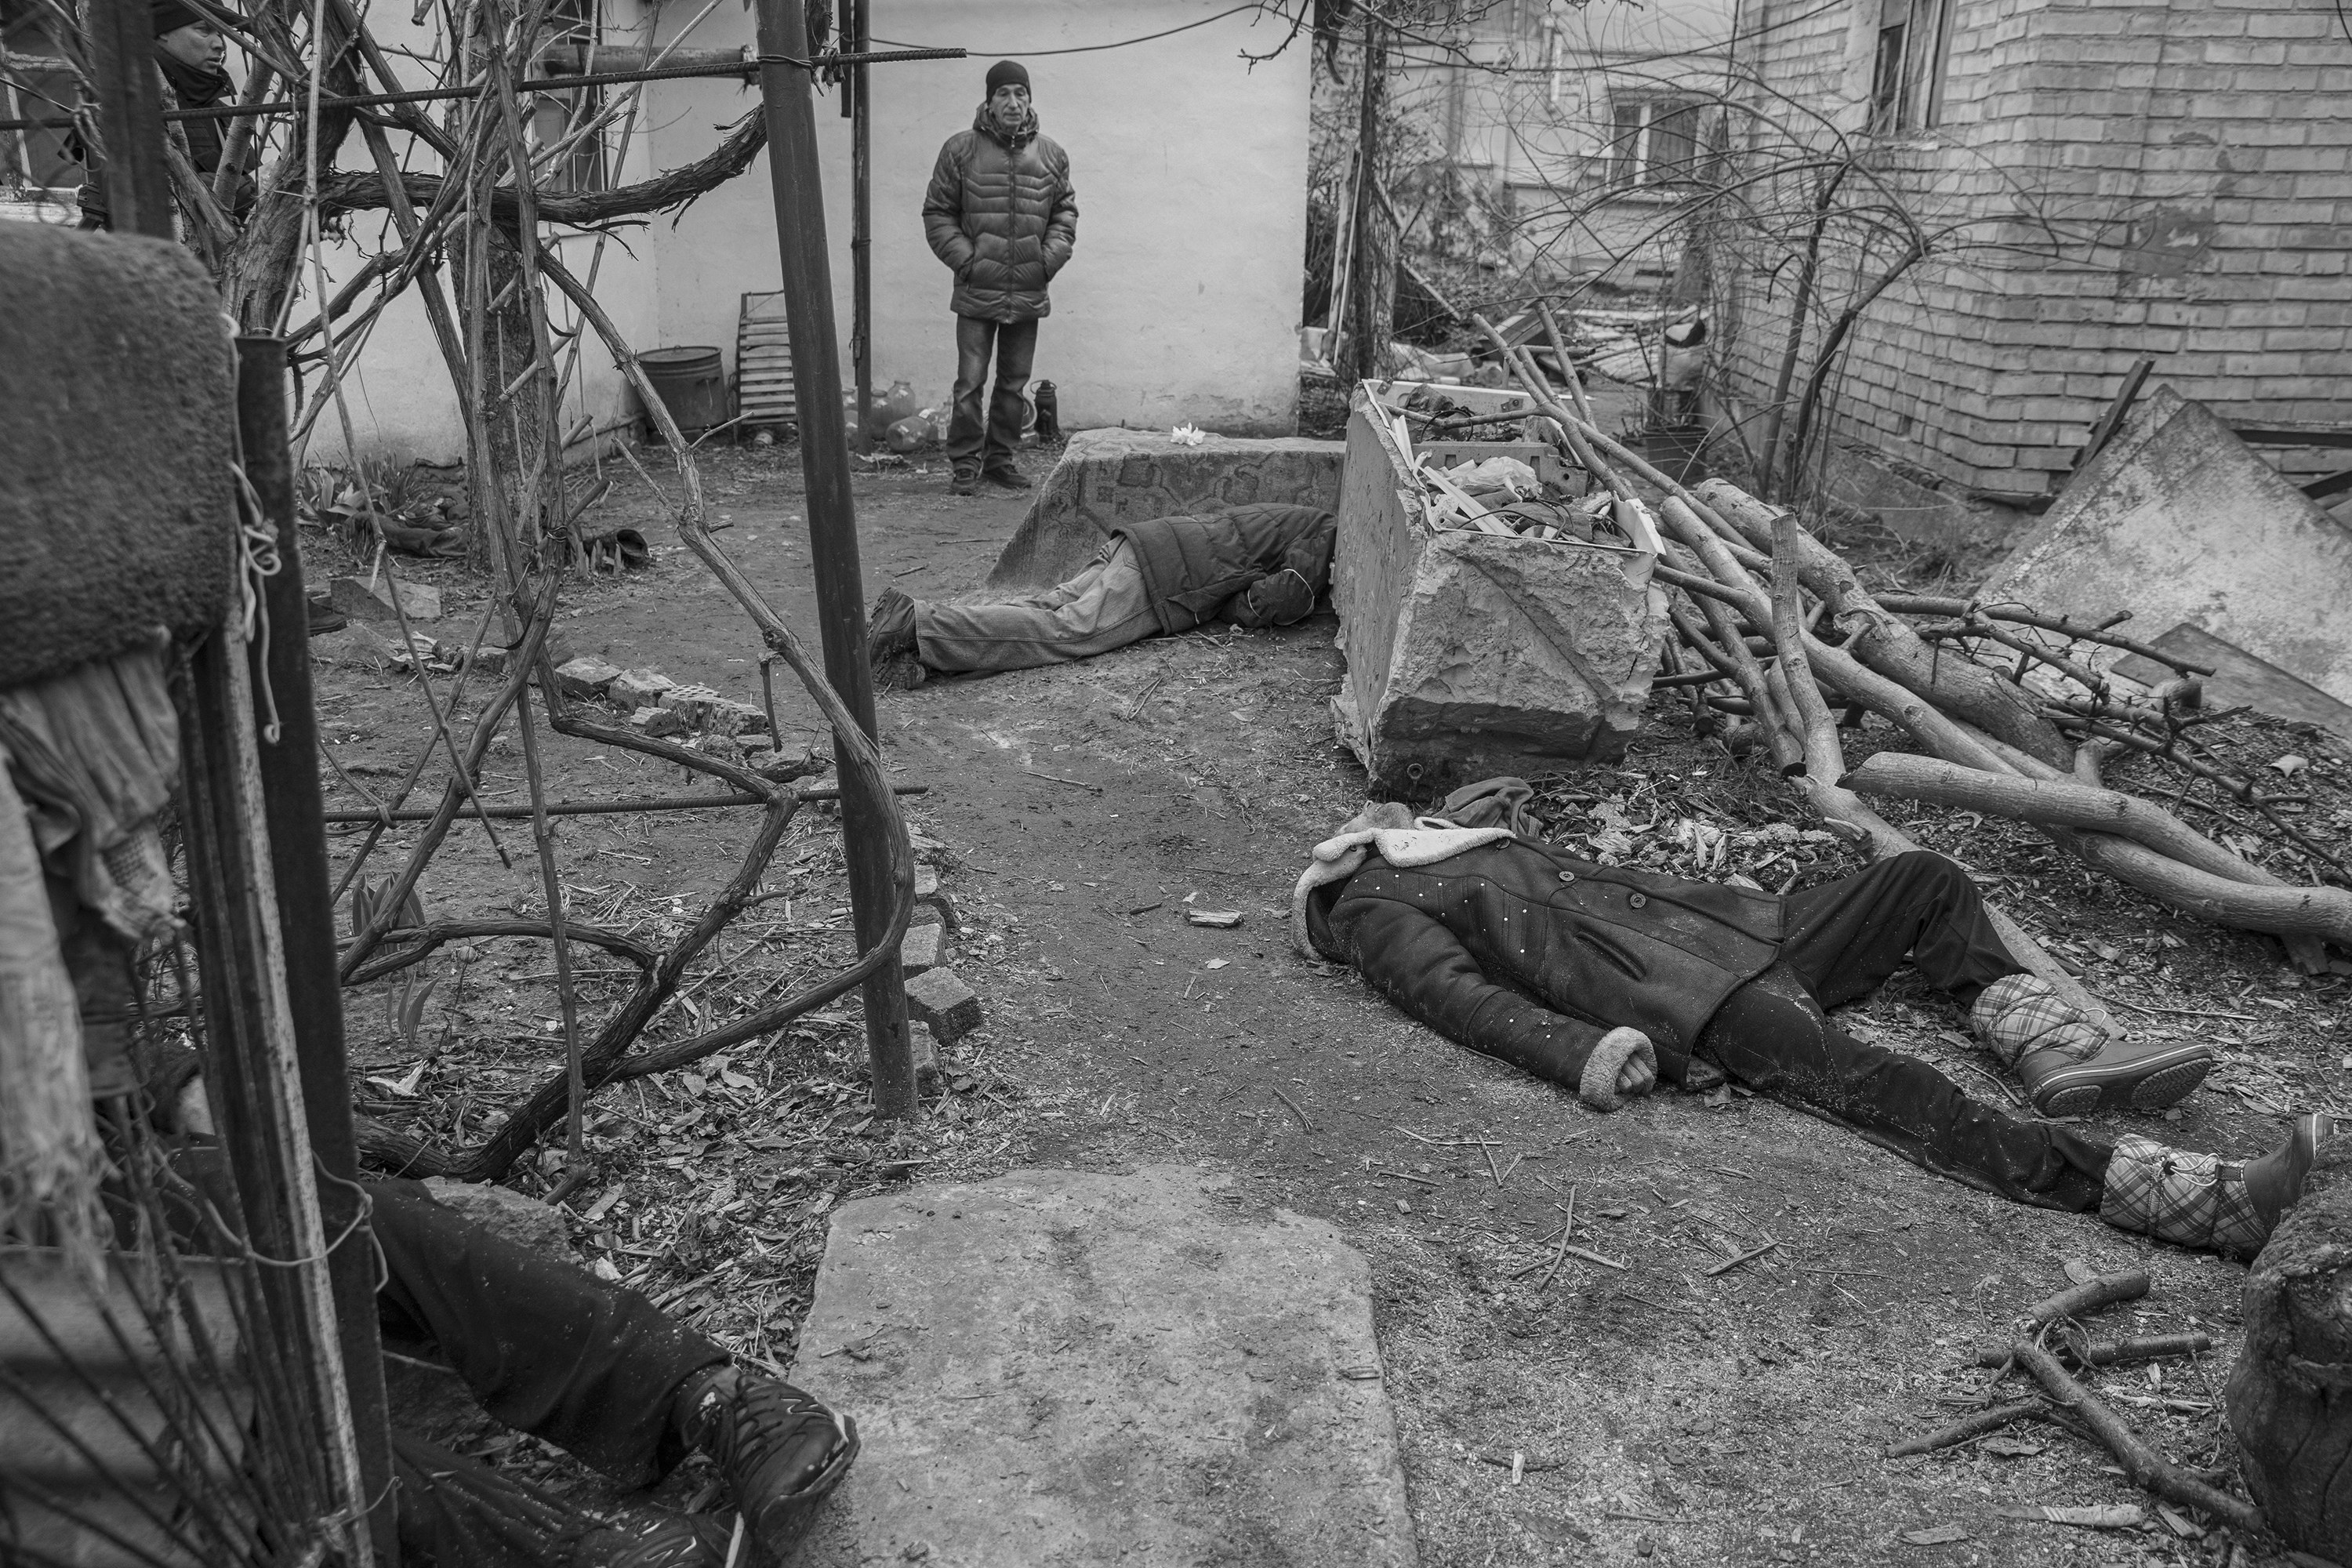 A man stands amid a barren area with several corpses lying on the ground in a black-and-white photo